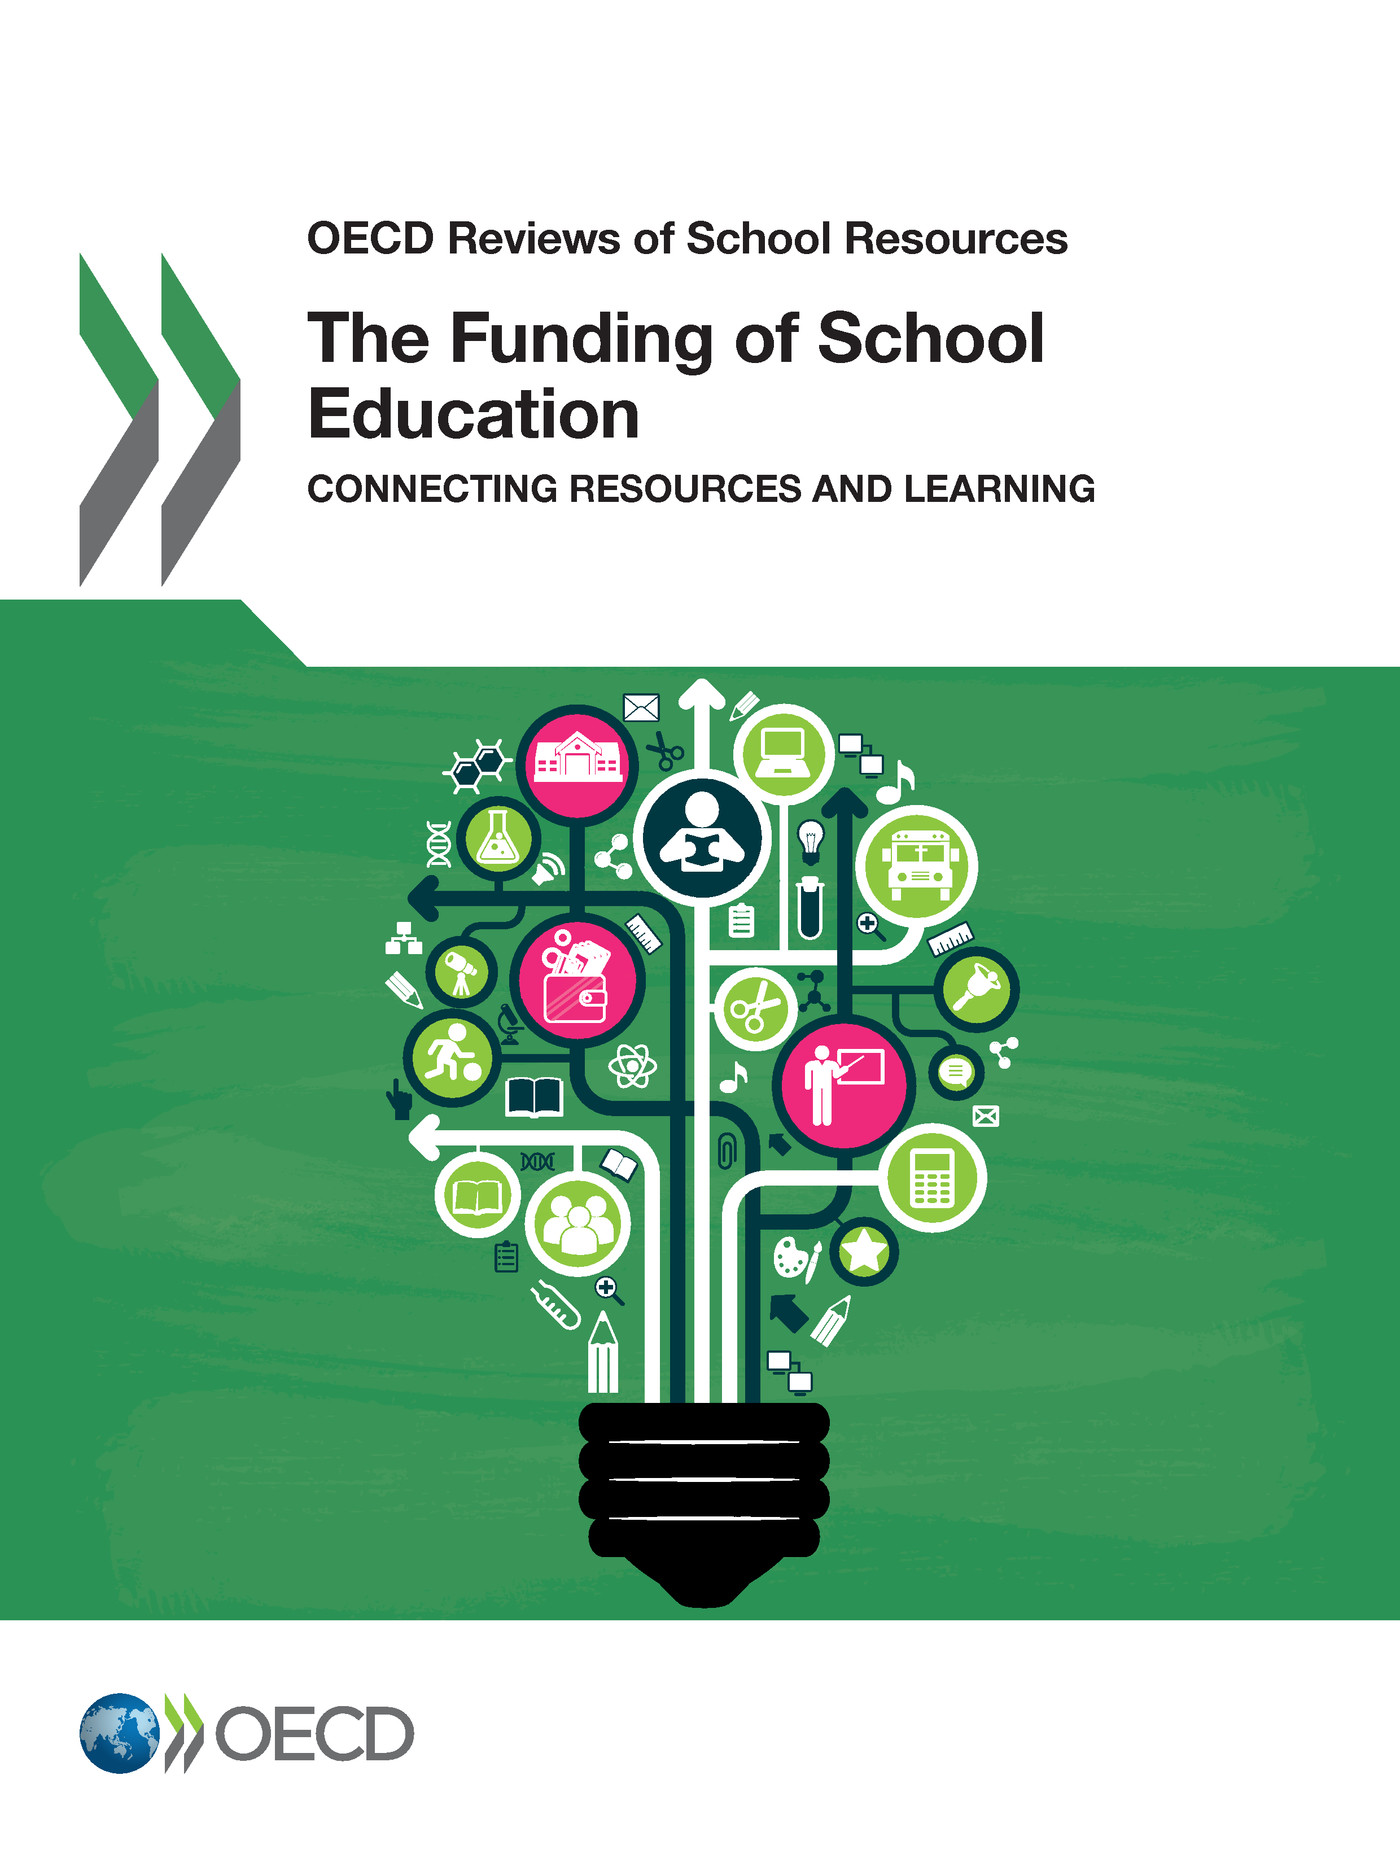 The Funding of School Education -  Collectif - OCDE / OECD